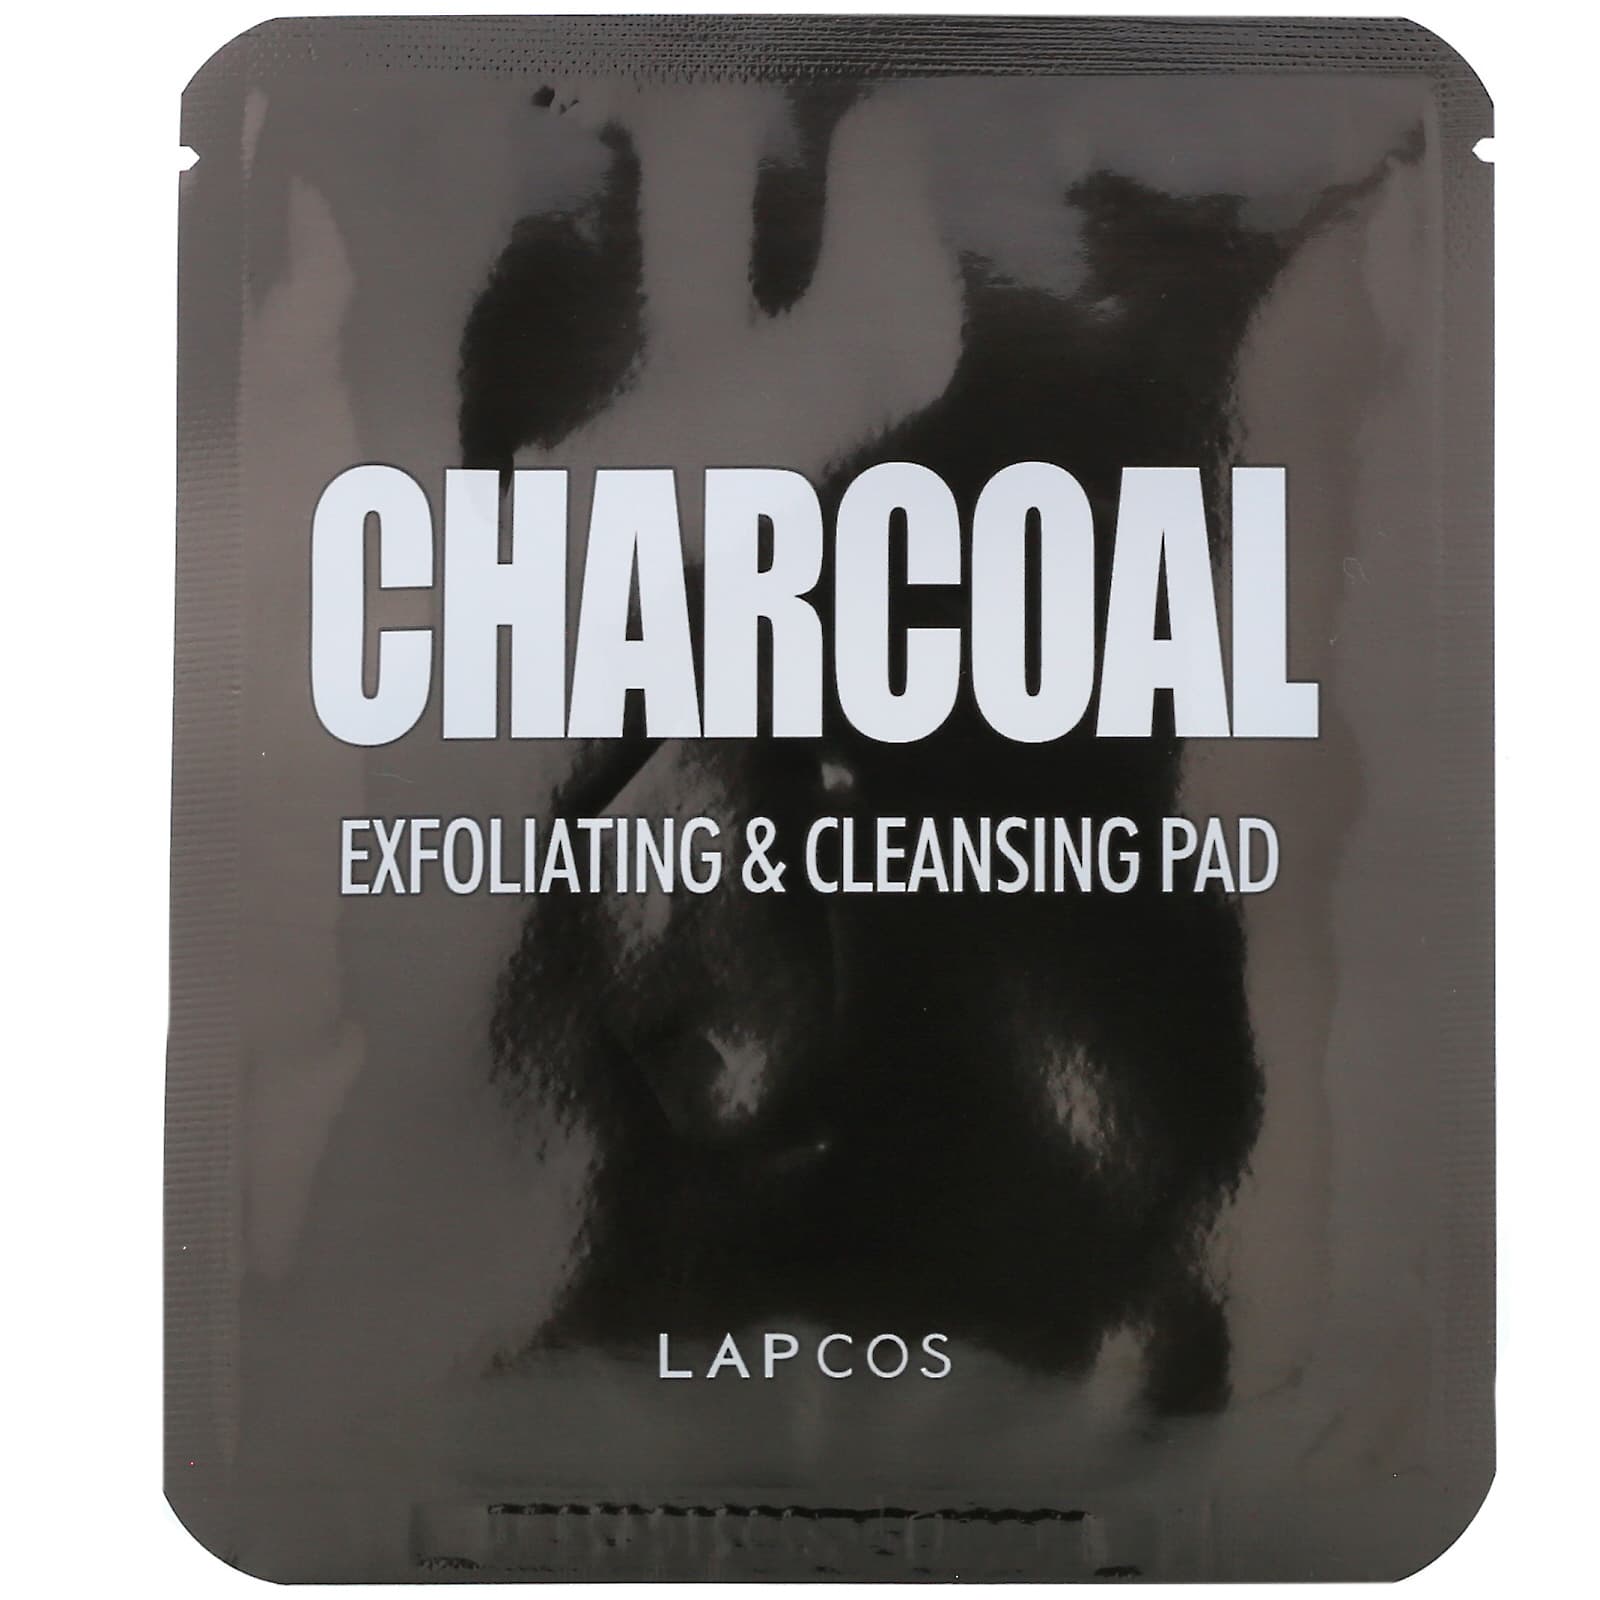 Lapcos, Charcoal, Exfoliating & Cleansing Pad, 0.24 fl oz (7 g) Each